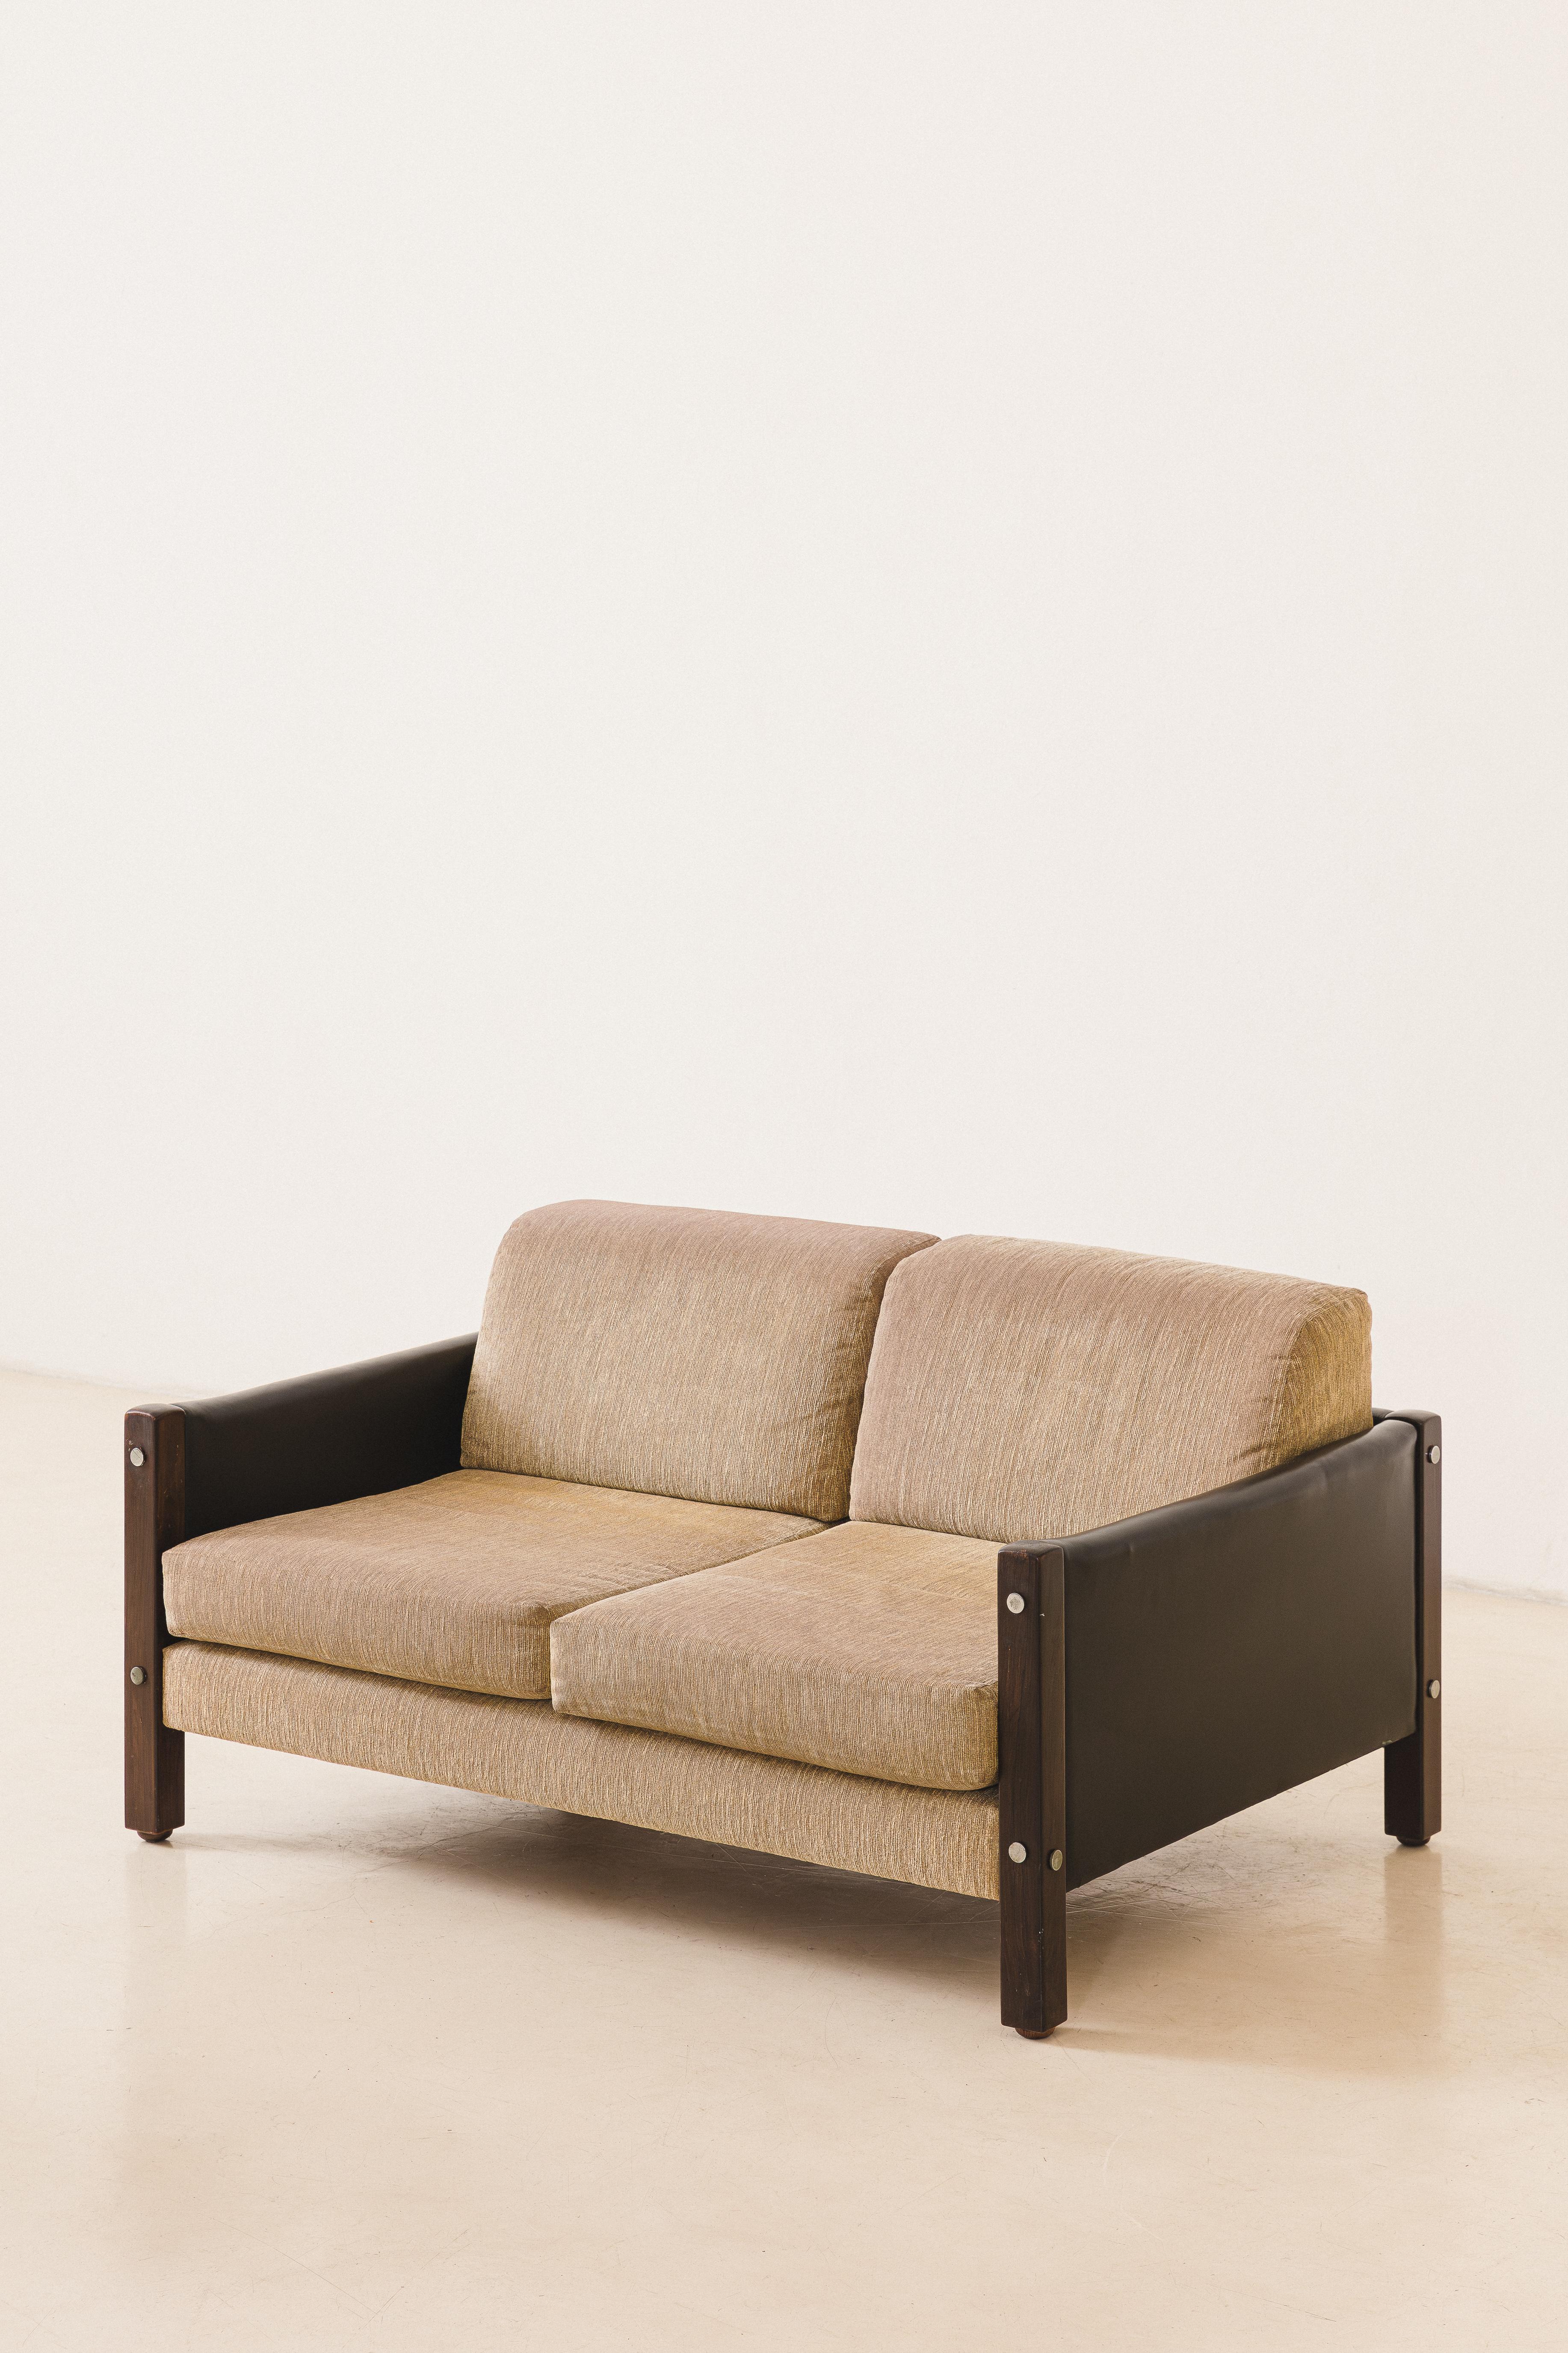 Mid-Century Modern Rosewood Two-Seat Millor Sofa, Sergio Rodrigues Modern Design, Brazil, 1960s For Sale